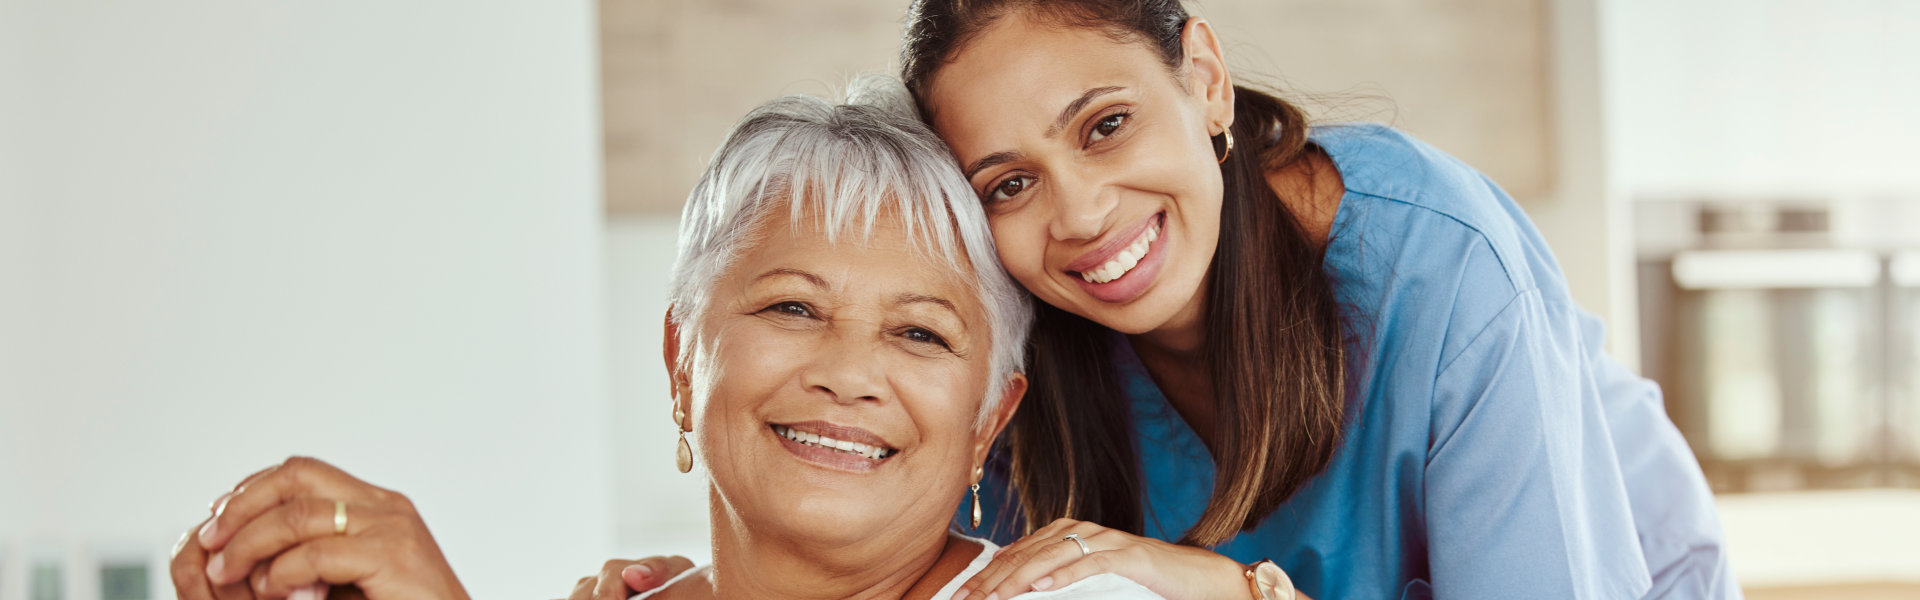 carer and senior woman smiling